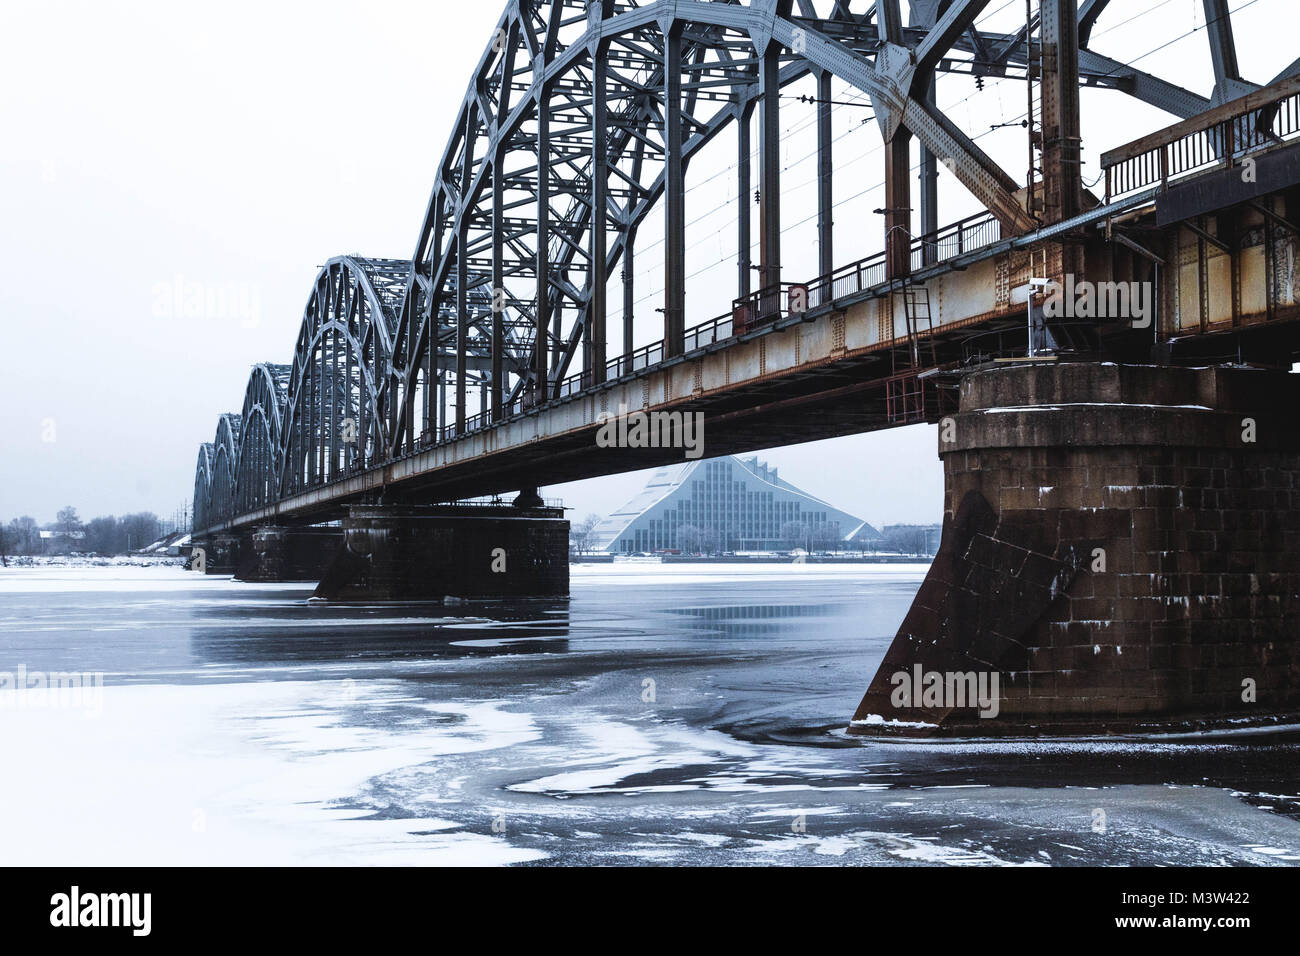 The Railway Bridge in a winter day with the National Library of Latvia on the Background Stock Photo